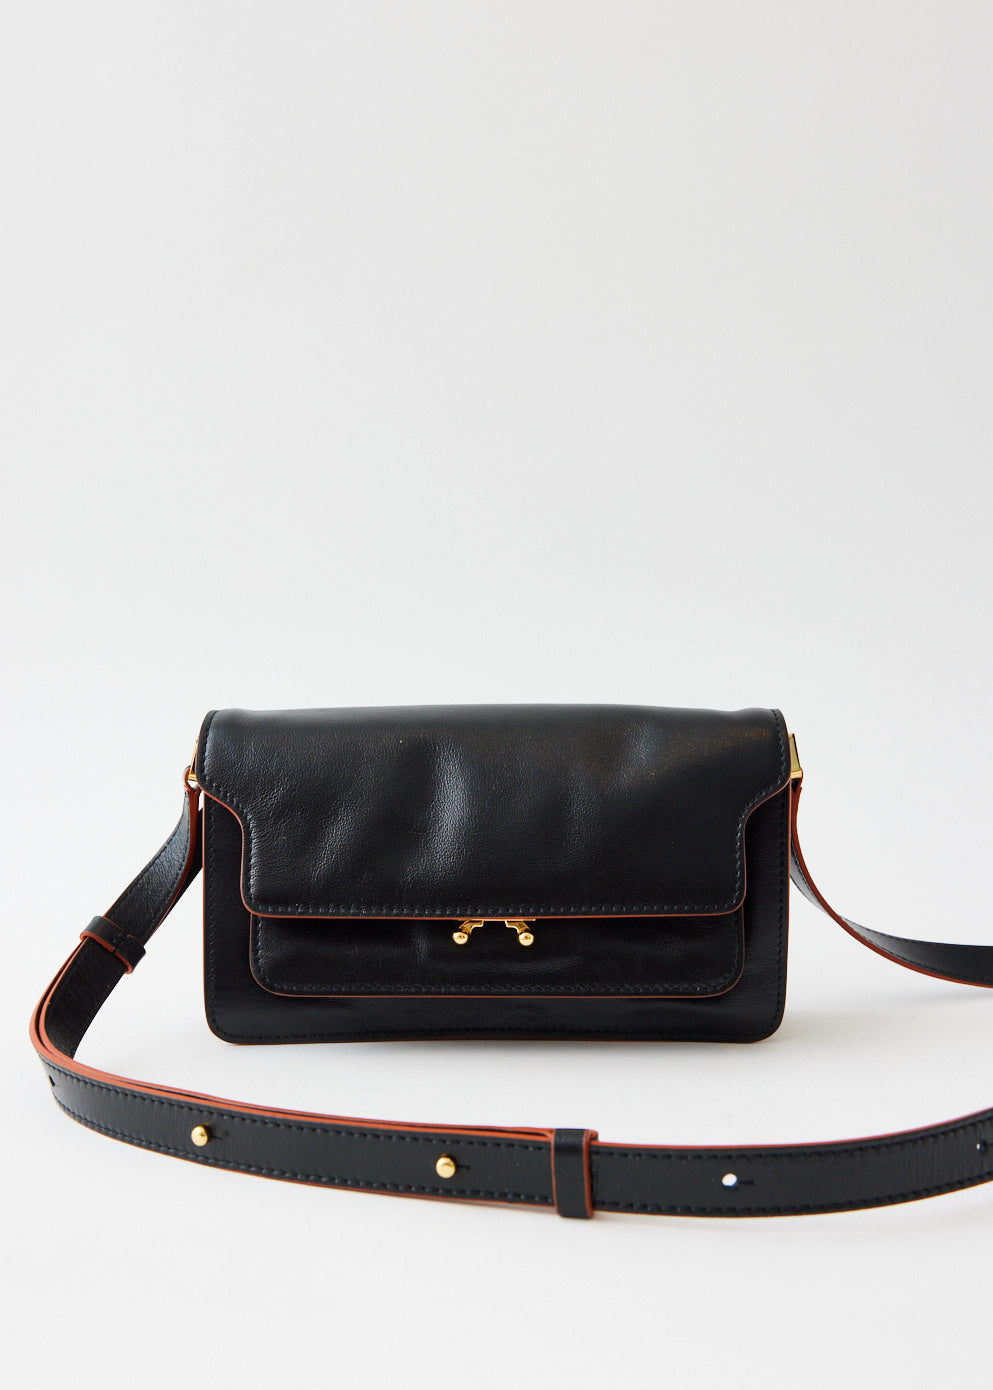 Marni Trunk Bag in Shiny Leather